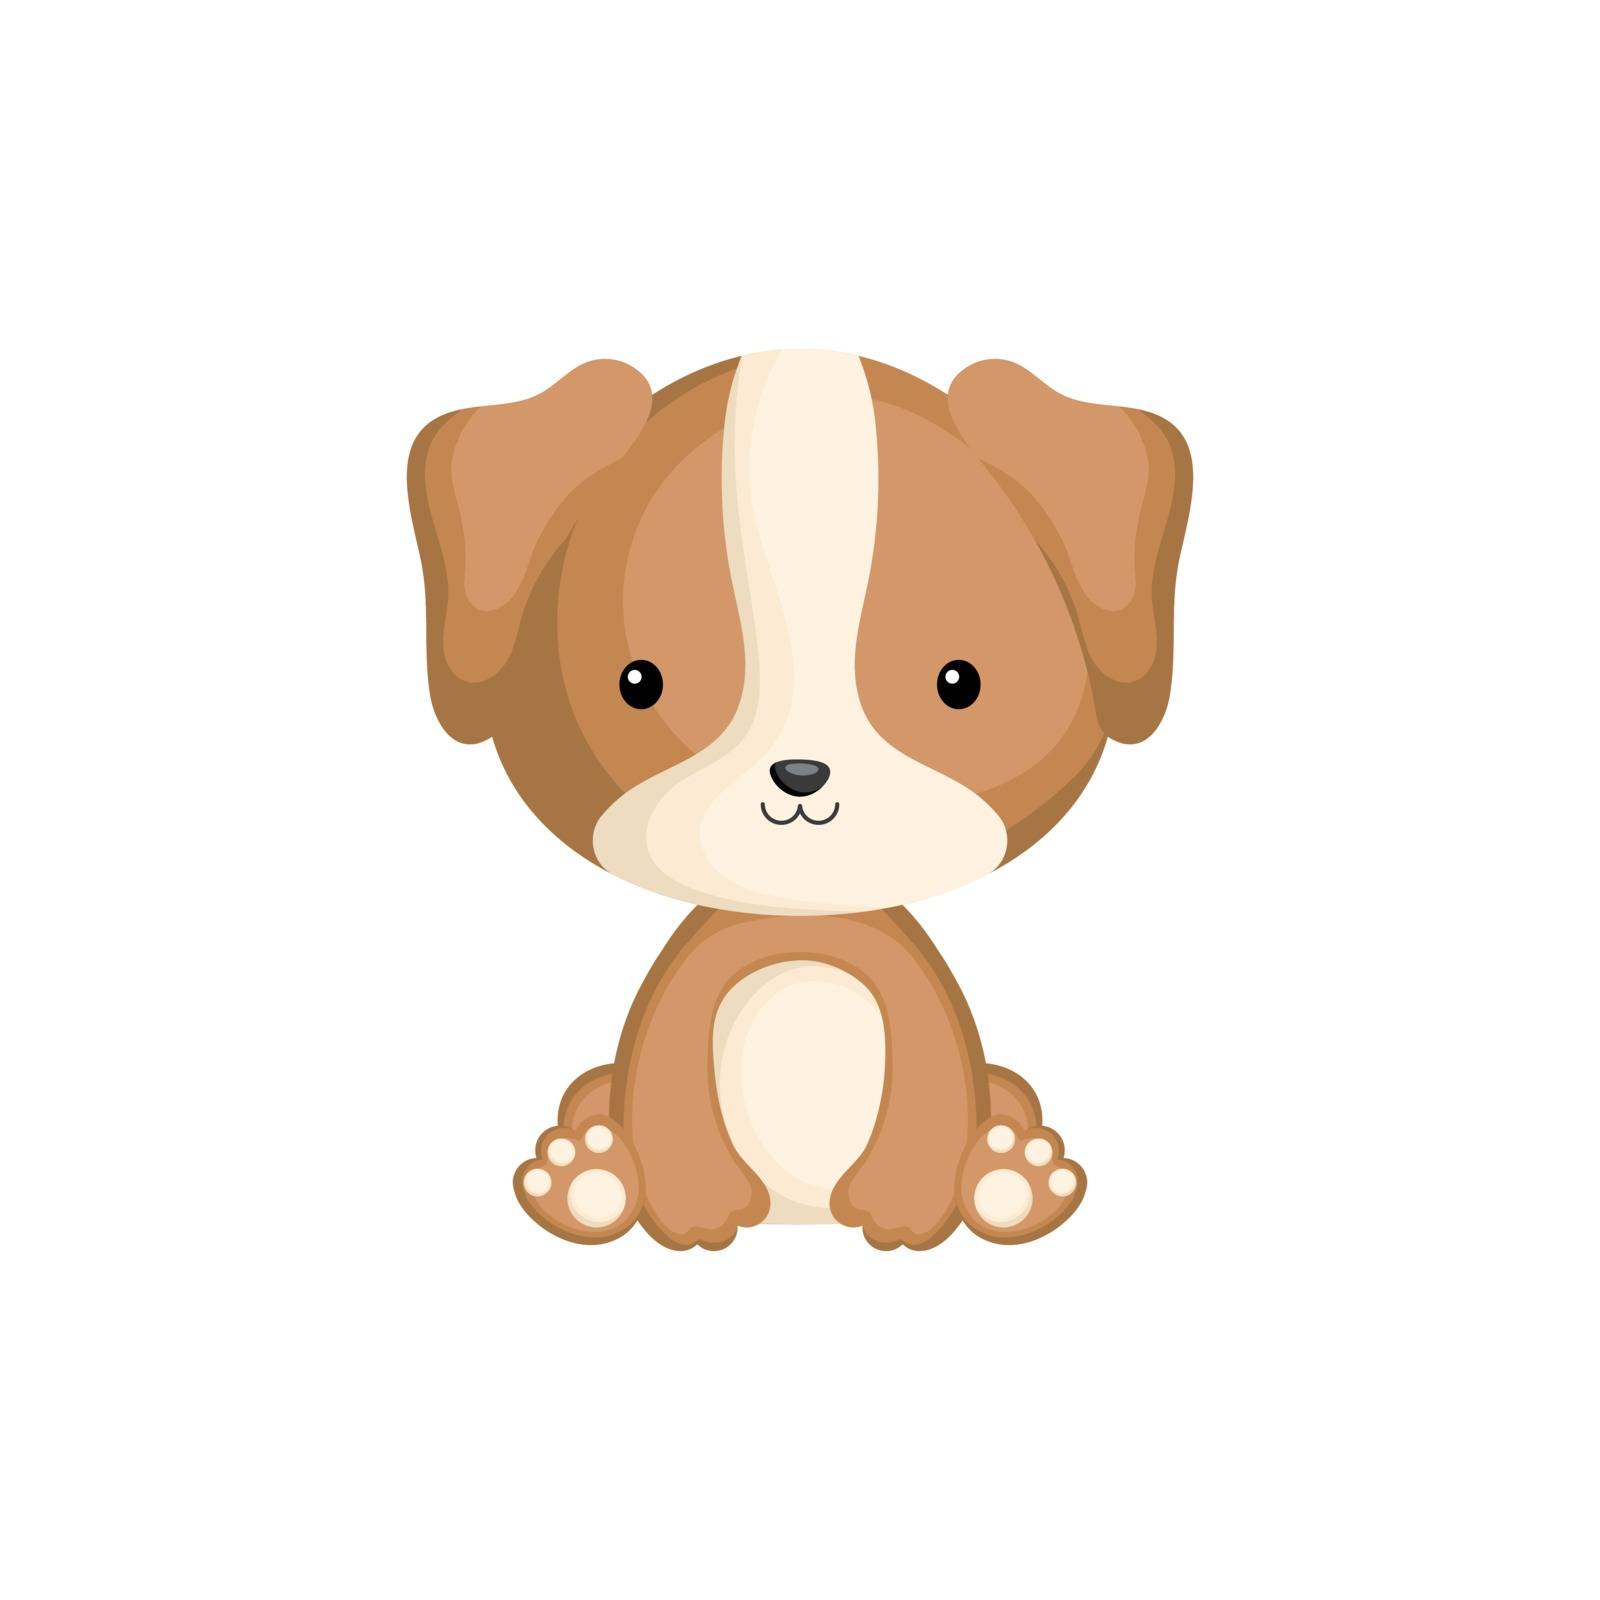 Cute funny sitting puppy isolated on white background. Domestic adorable animal character for design of album, scrapbook, card and invitation. Flat cartoon colorful vector illustration.